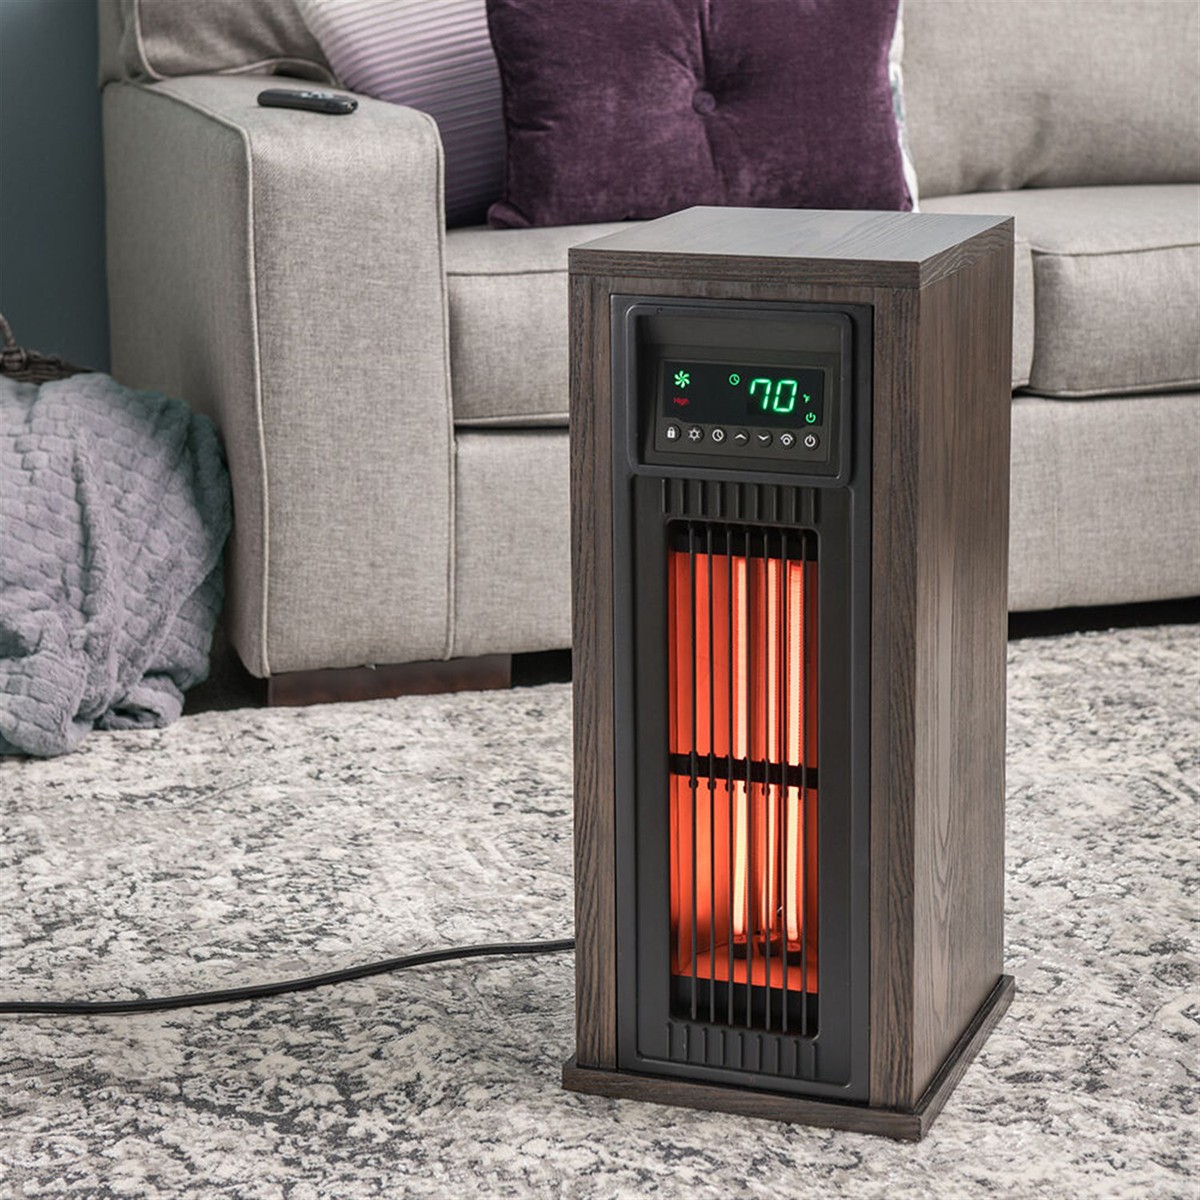 Lifesmart Infrared 23-In. Oscillating Tower Heater - Complete Review  